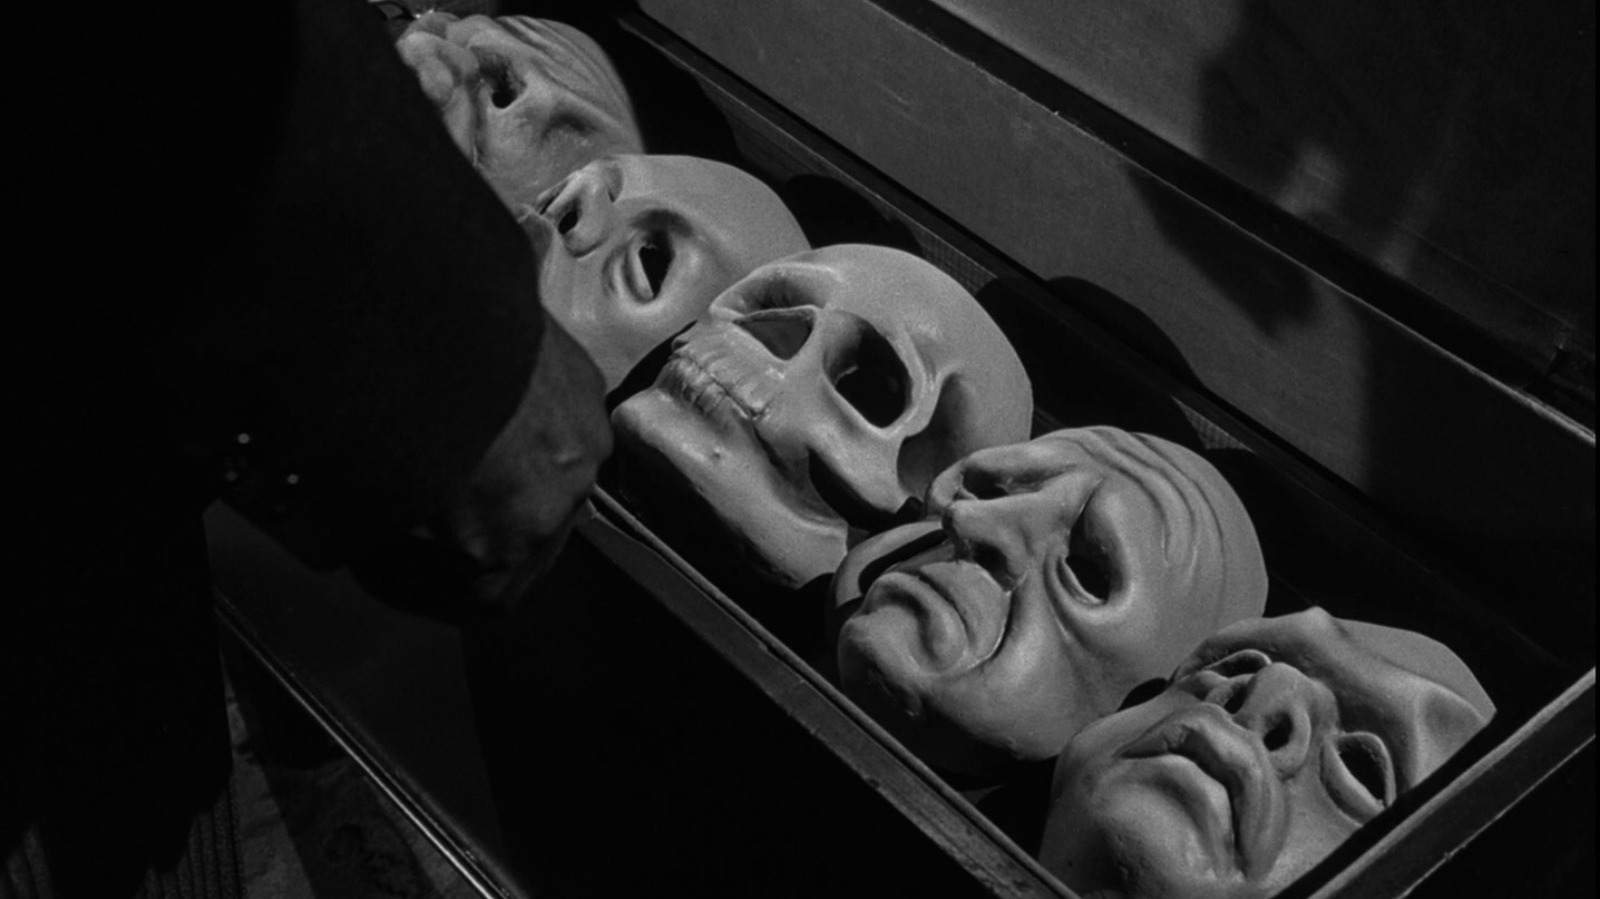 The Masks' Director Made Twilight Zone History In More Ways Than One